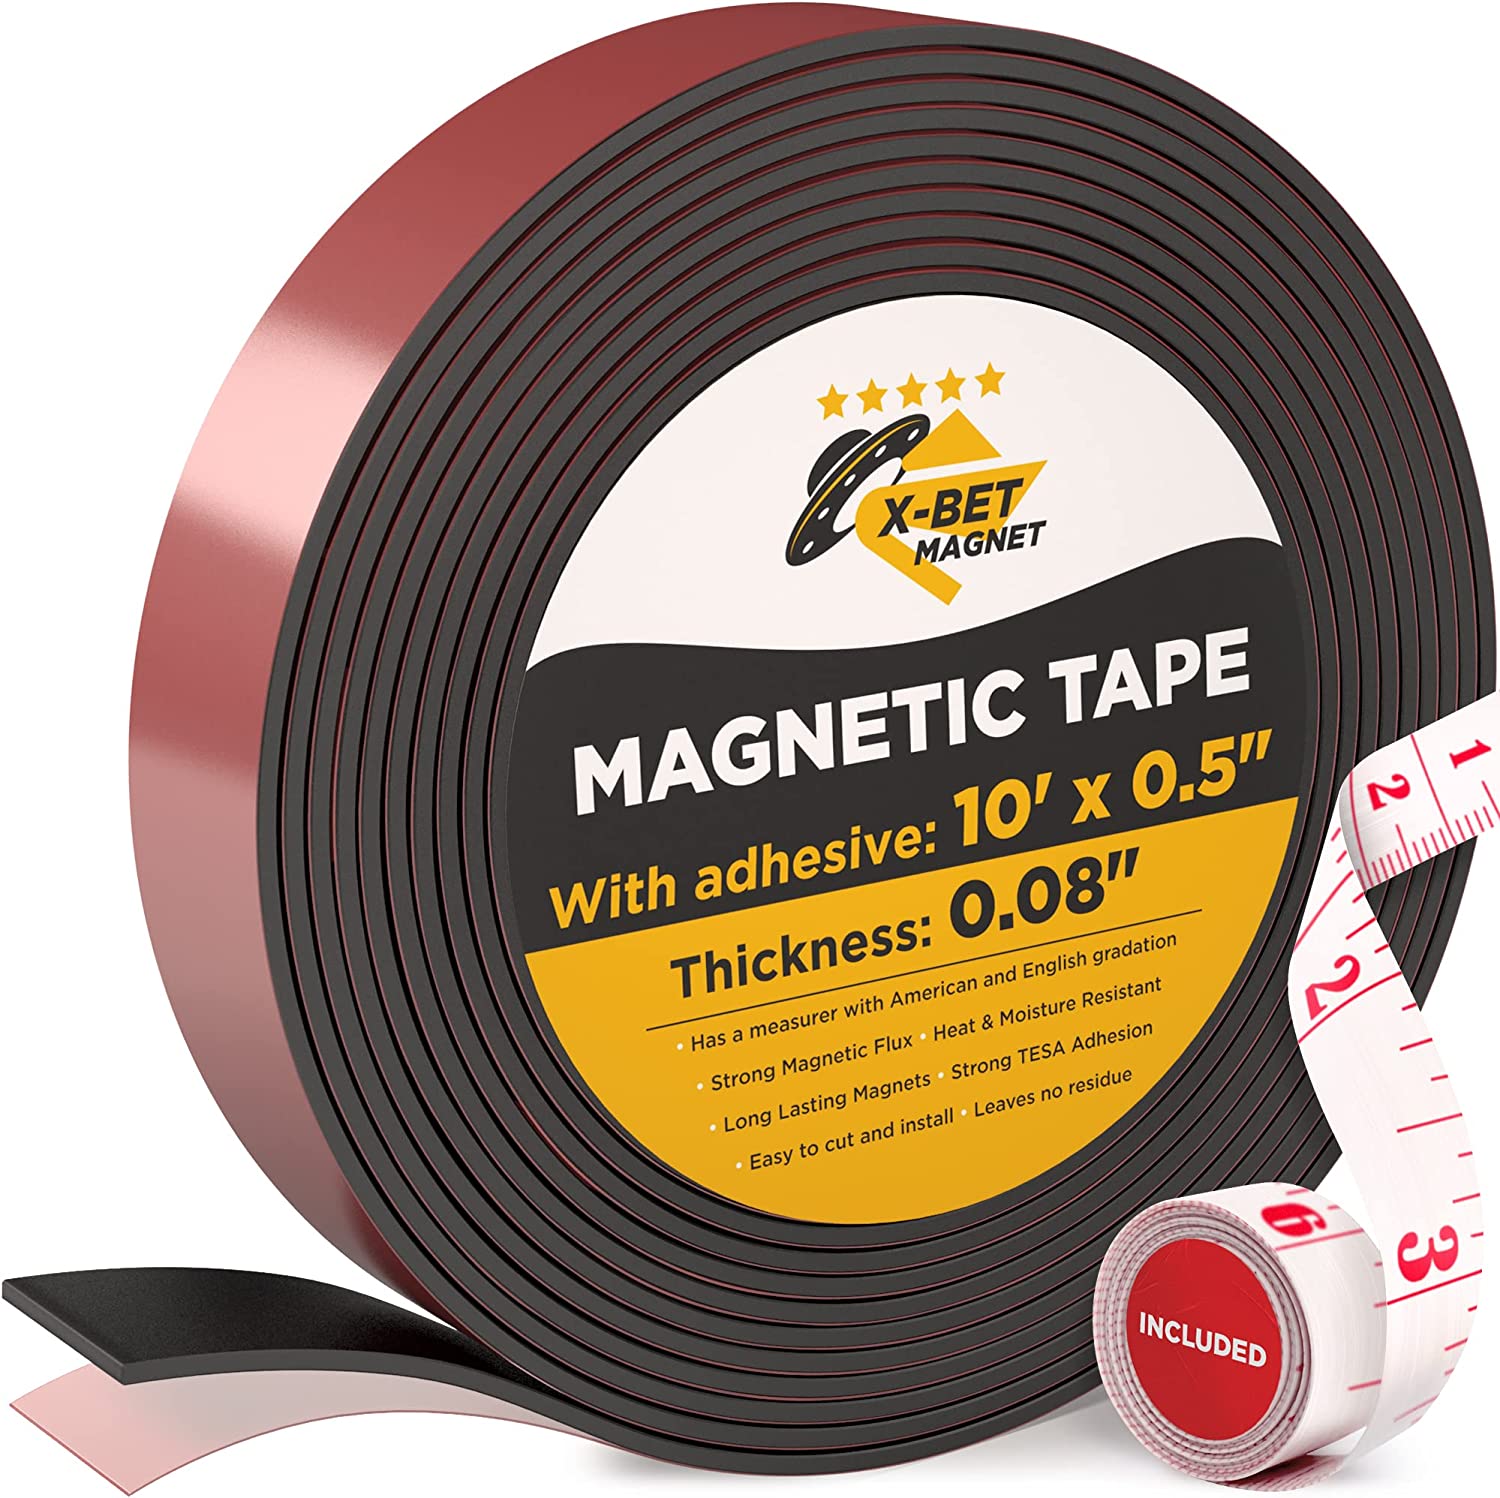 Buy Magnetic Strips (15 cm) now at GAUDER